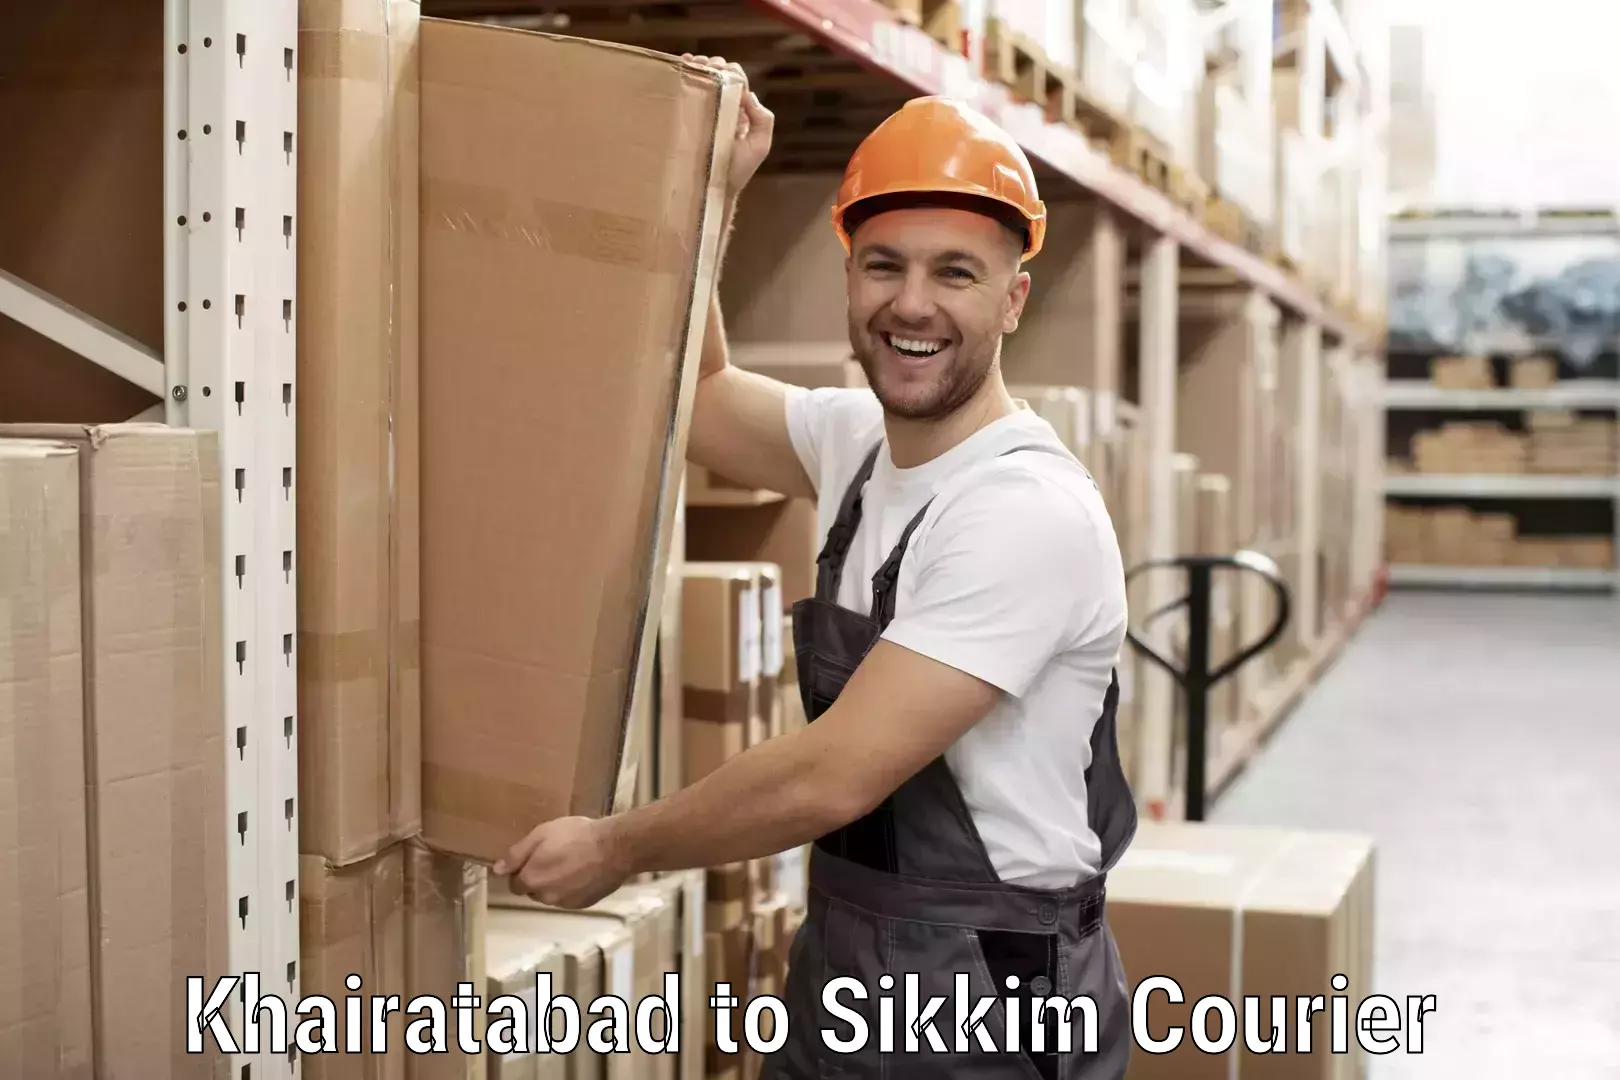 Global shipping networks Khairatabad to North Sikkim